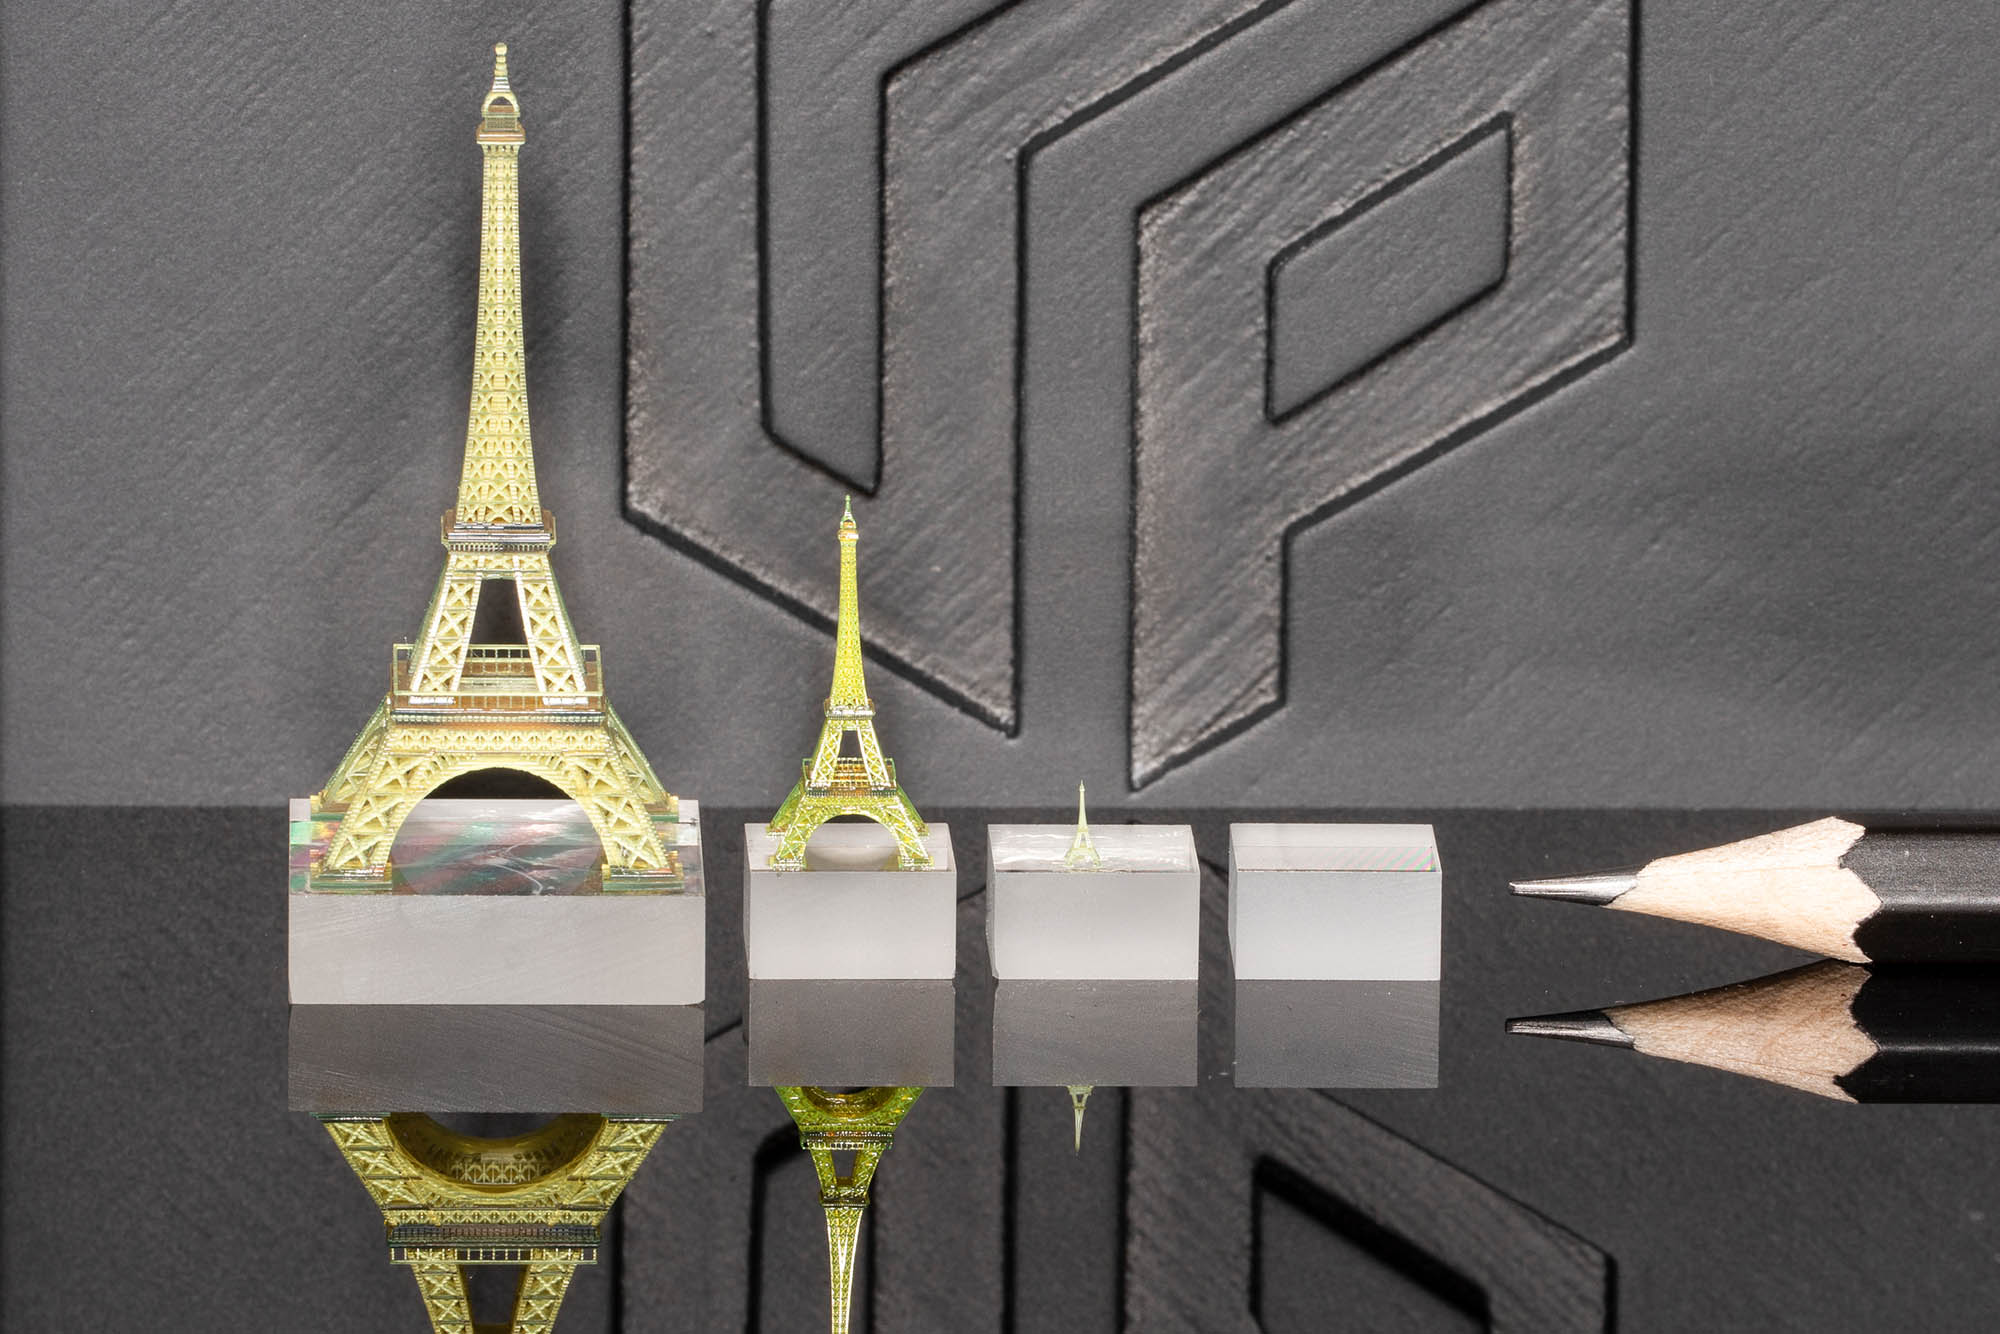 Photo: miniature models of Eiffel Tower in three sizes